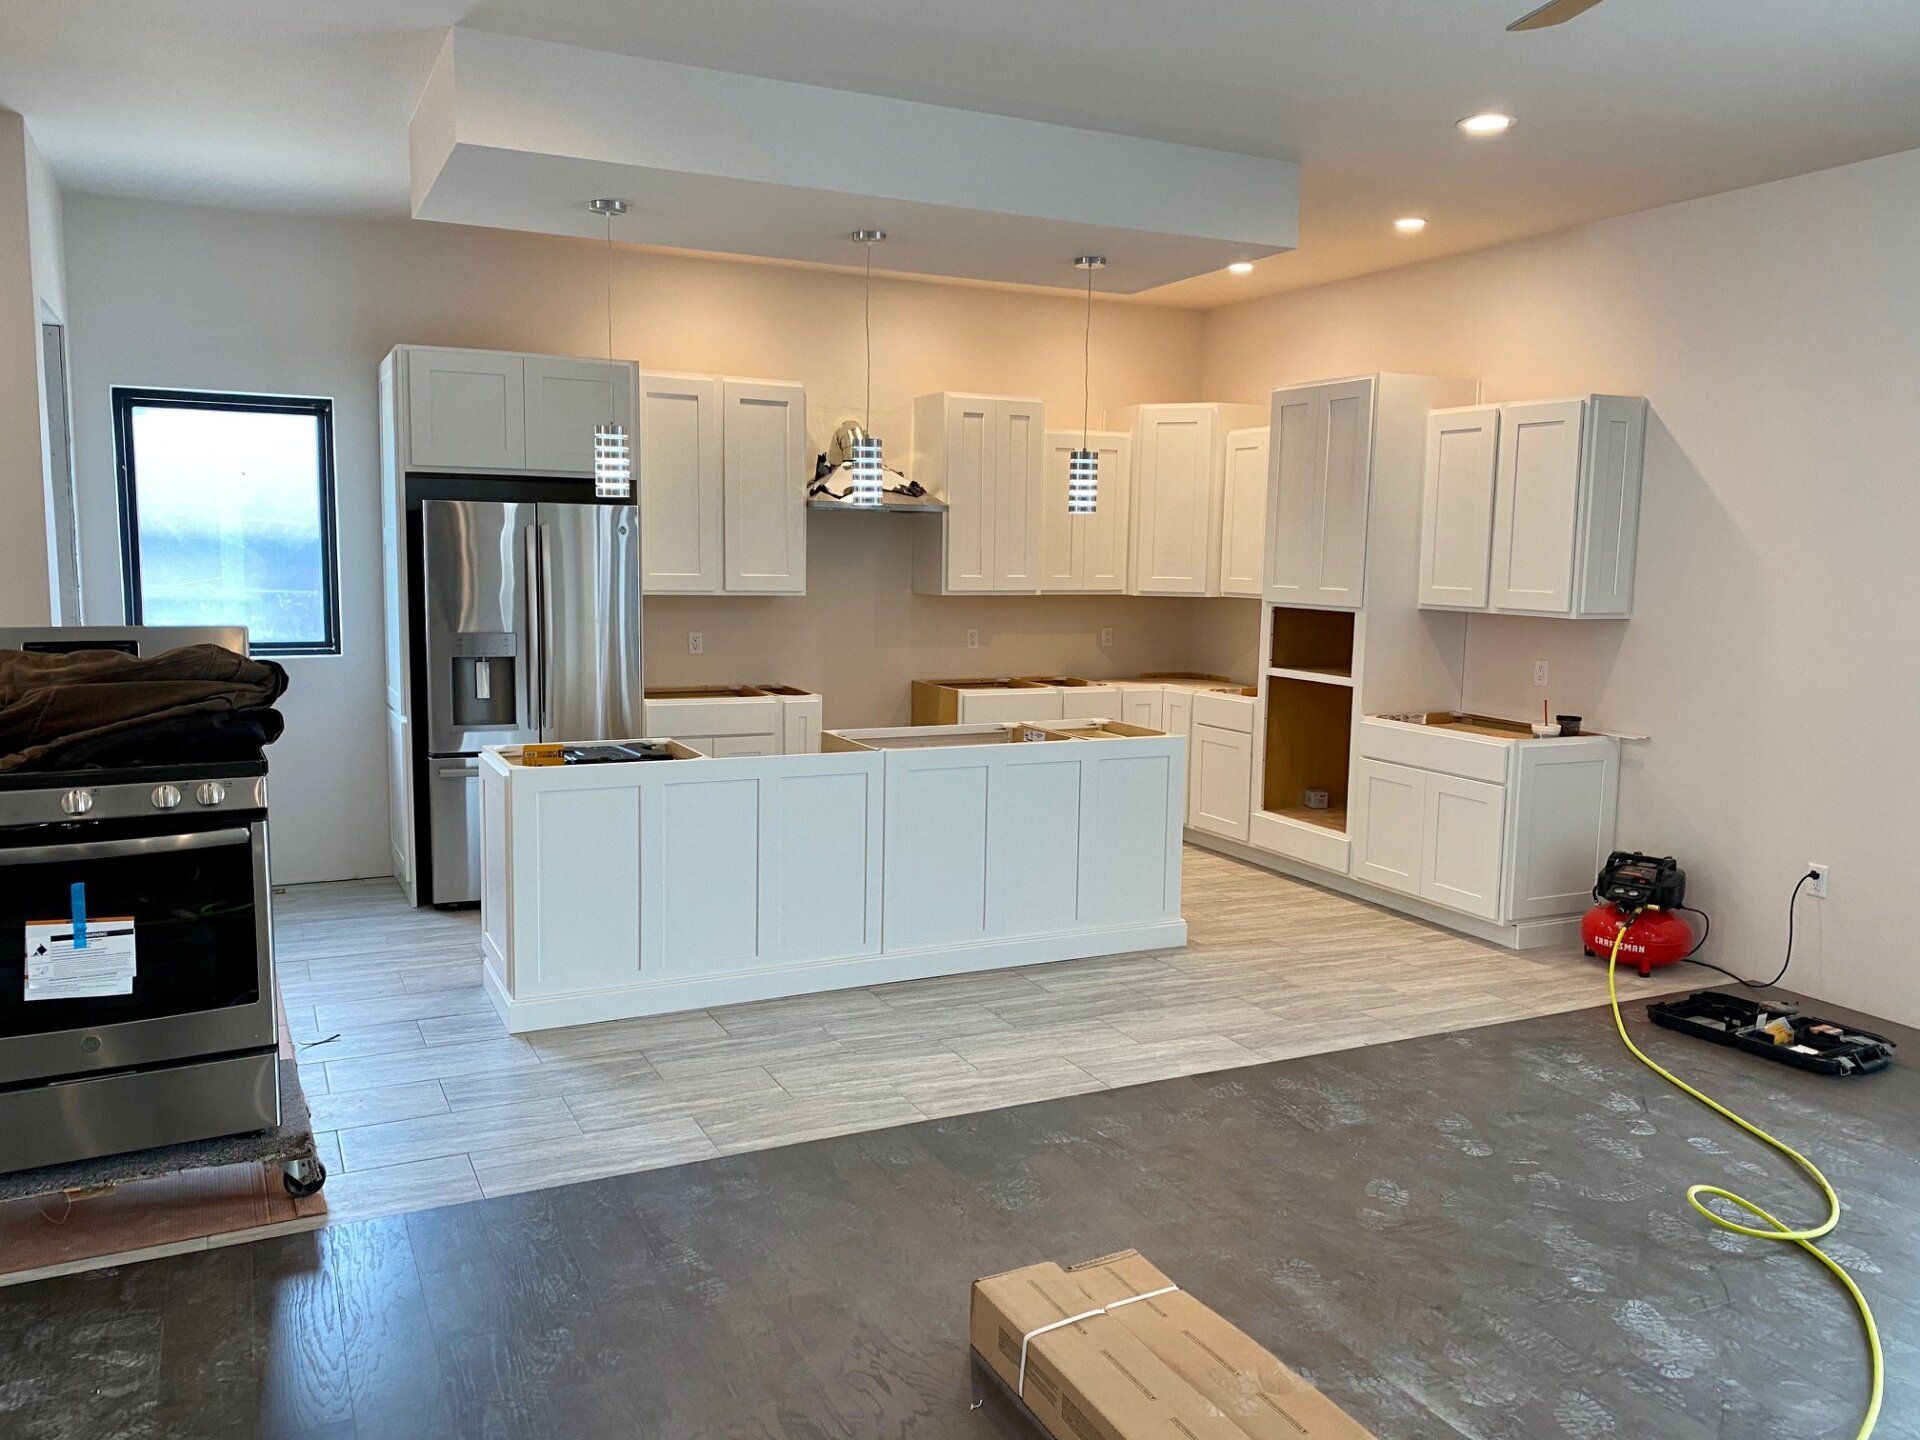 Give Your Family in Mid-Missouri a Brand New, Gorgeous Kitchen With Watts Construction